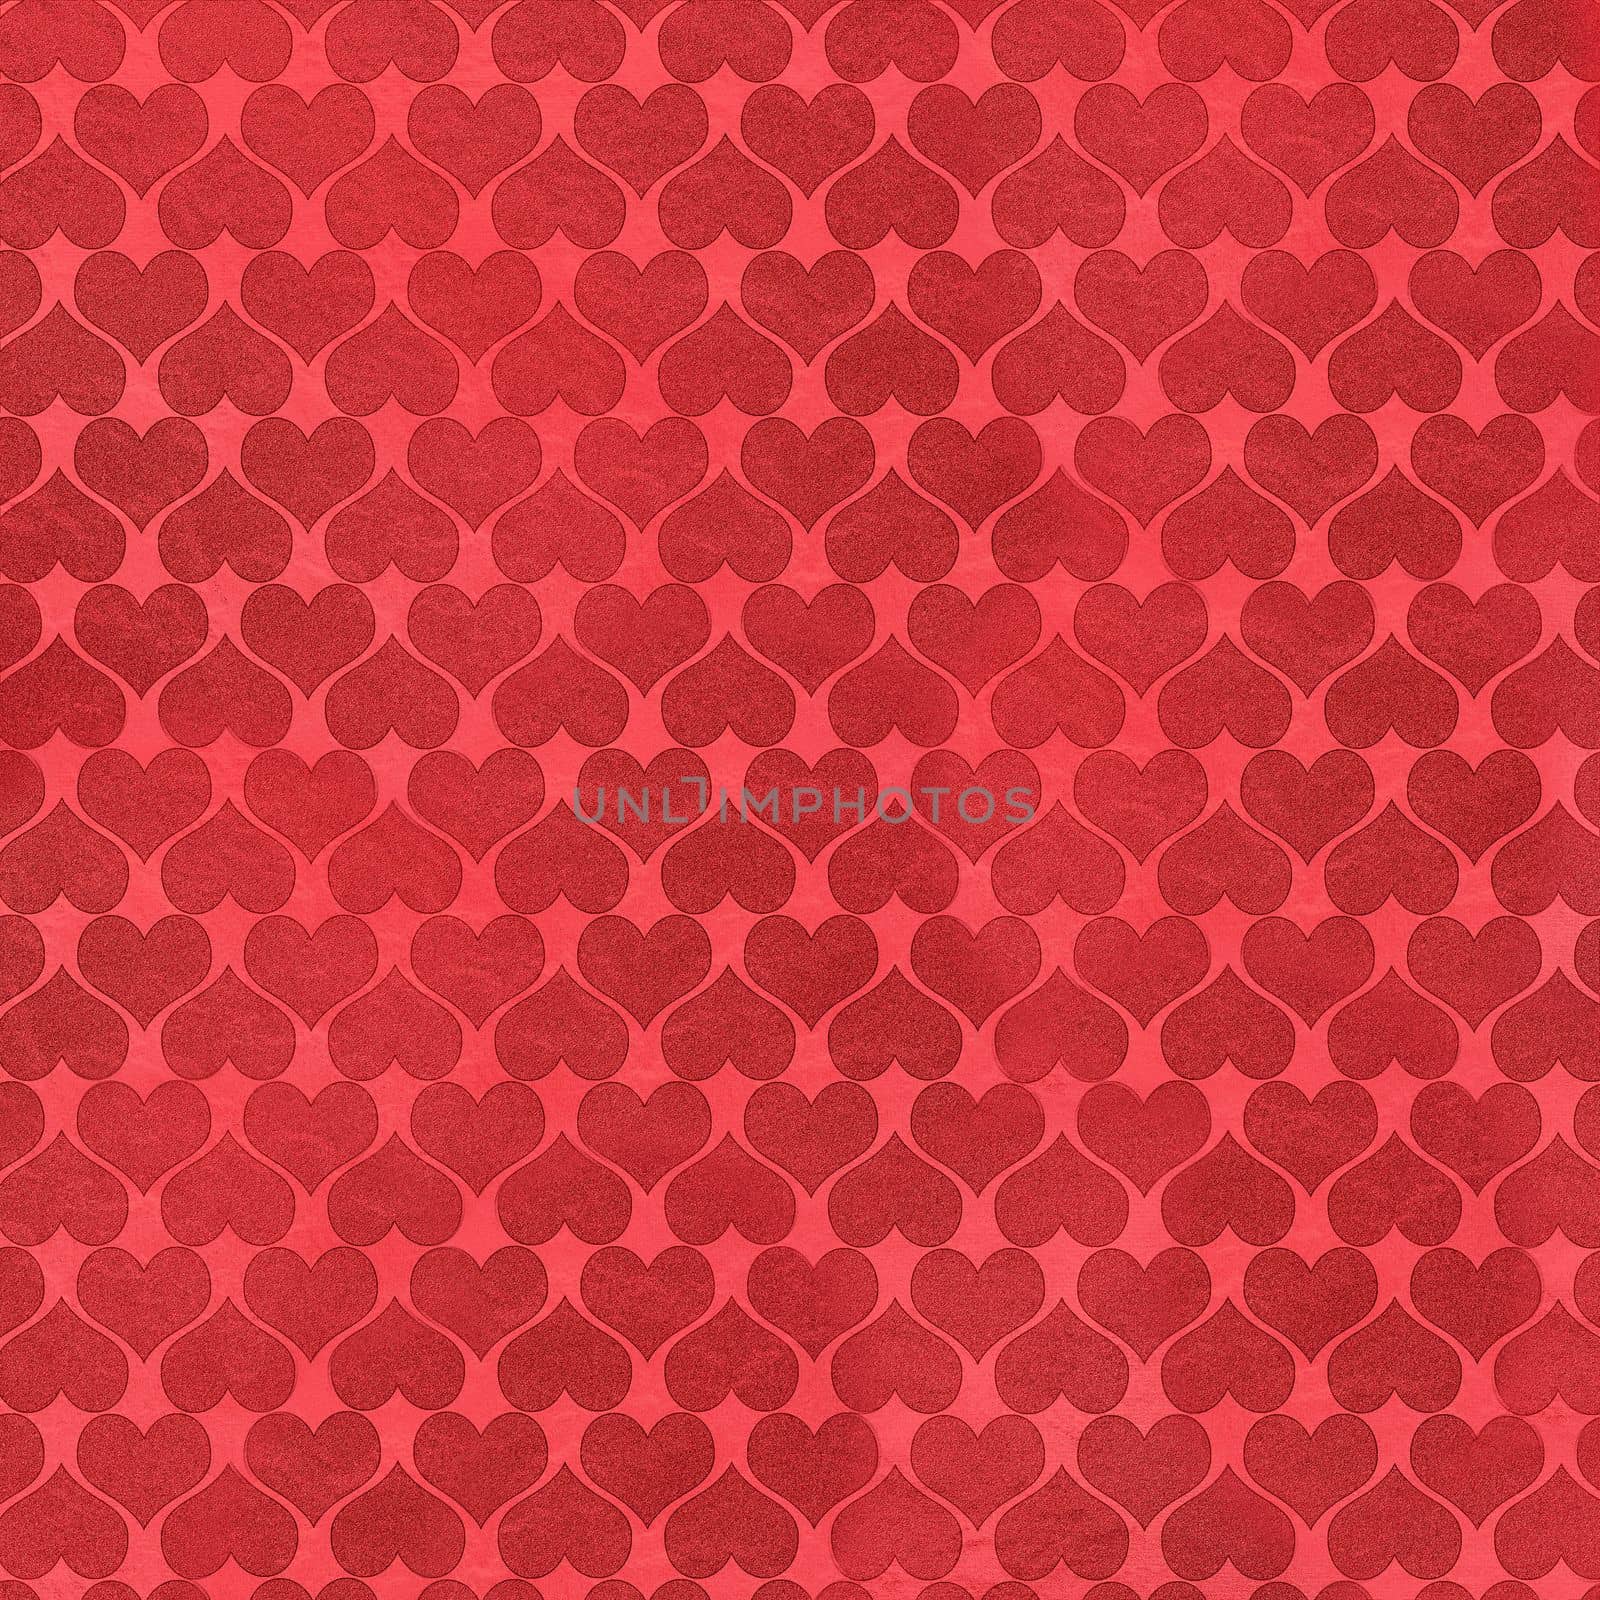 Abstract pattern in the form of hearts on a red background.Macrophotography.Texture or background